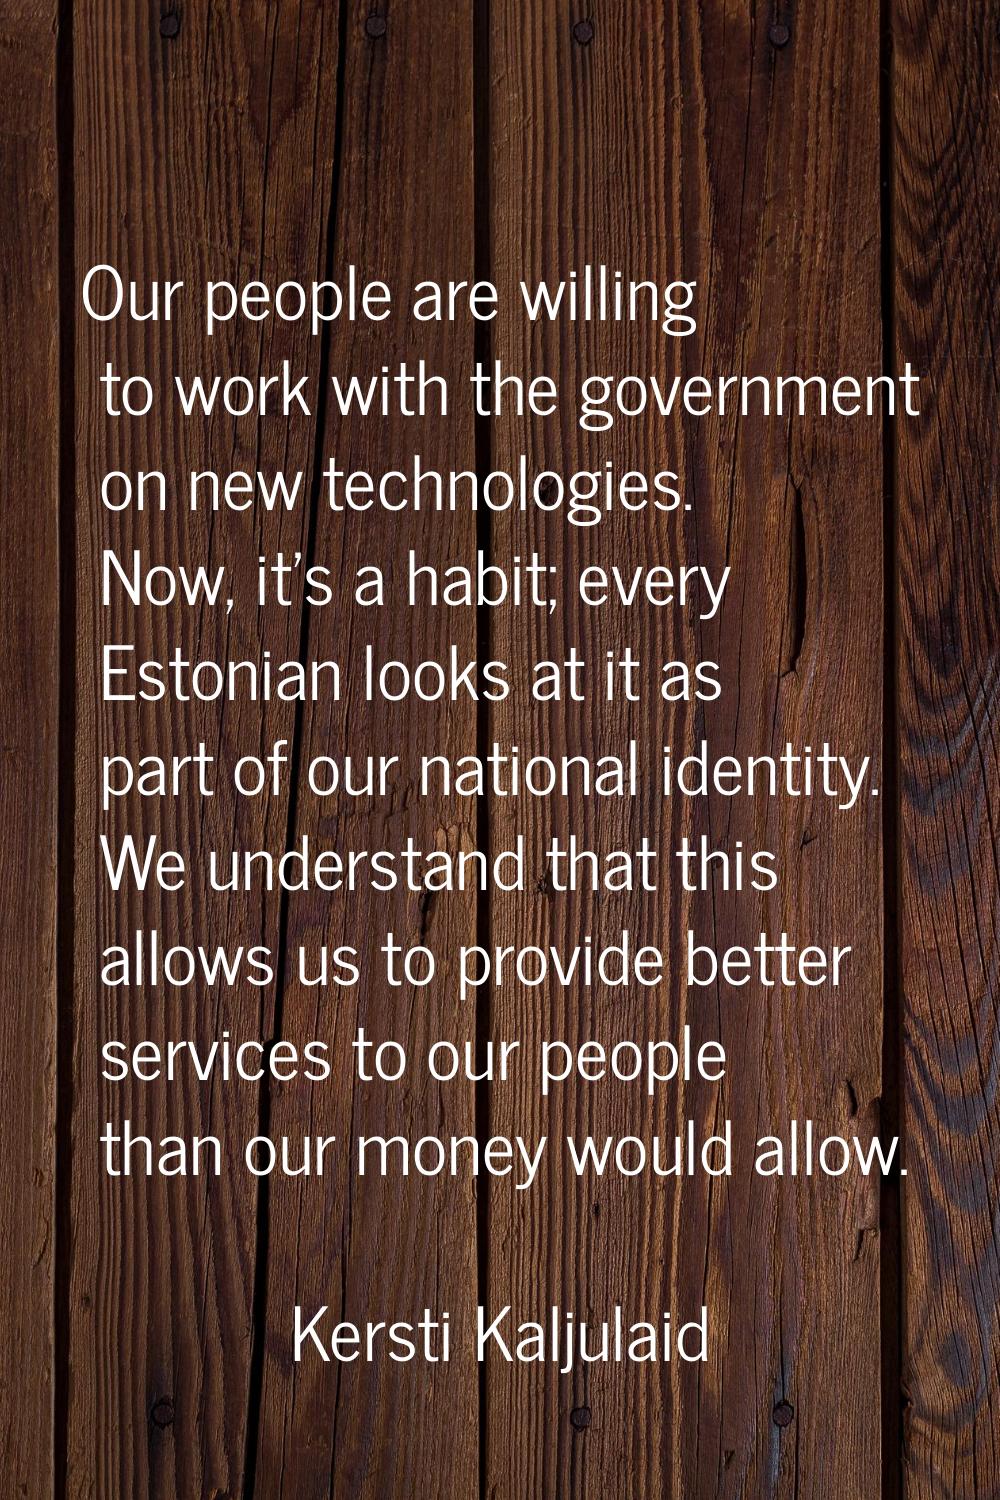 Our people are willing to work with the government on new technologies. Now, it's a habit; every Es